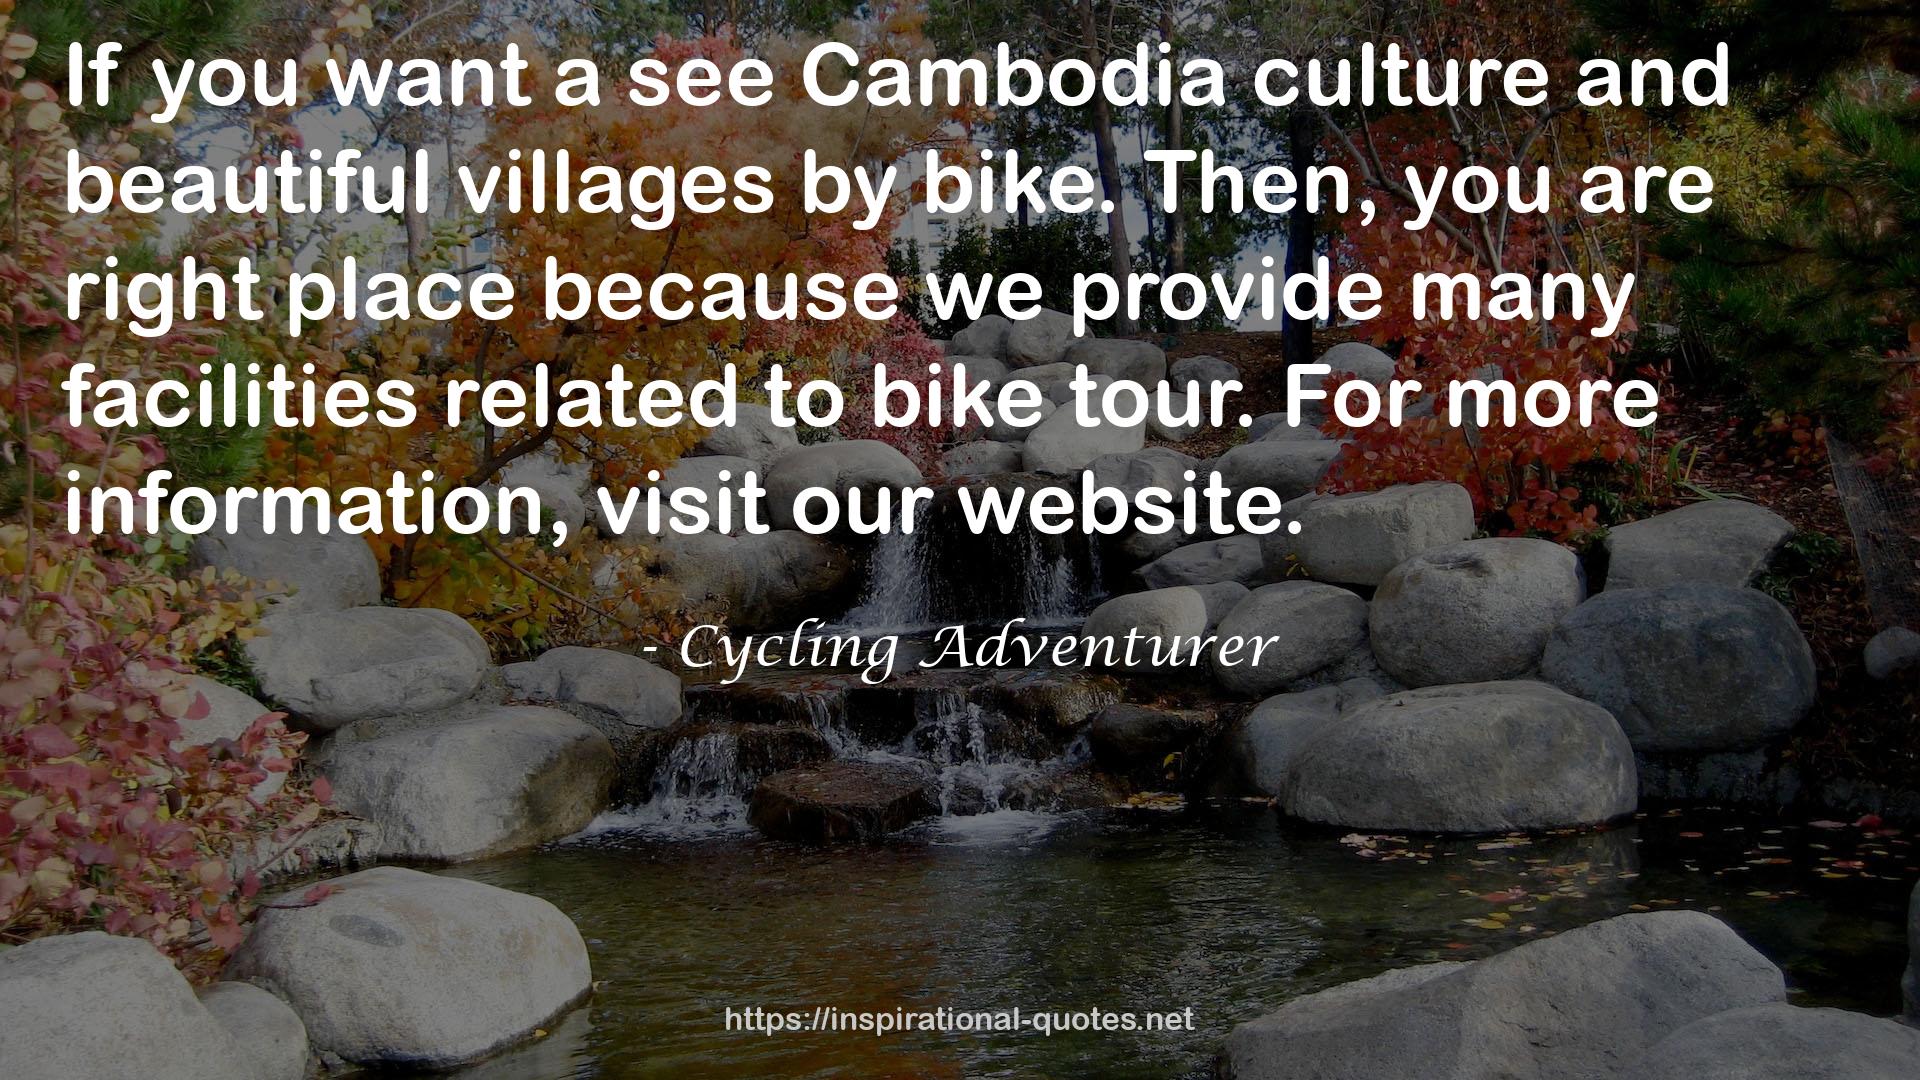 Cycling Adventurer QUOTES